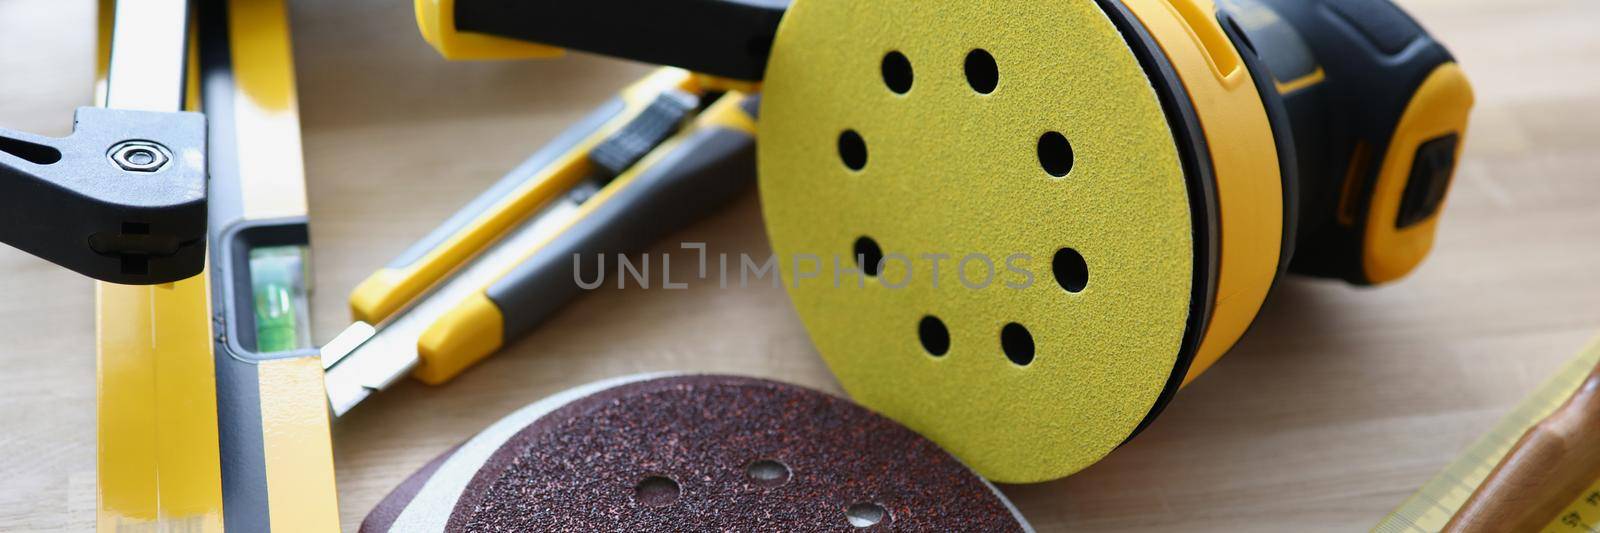 Close-up of workers instruments for repairing, equipment for work. Sanding machine, level, ruler, box cutter on wooden surface. Construction, builder, renovation, carpenter concept